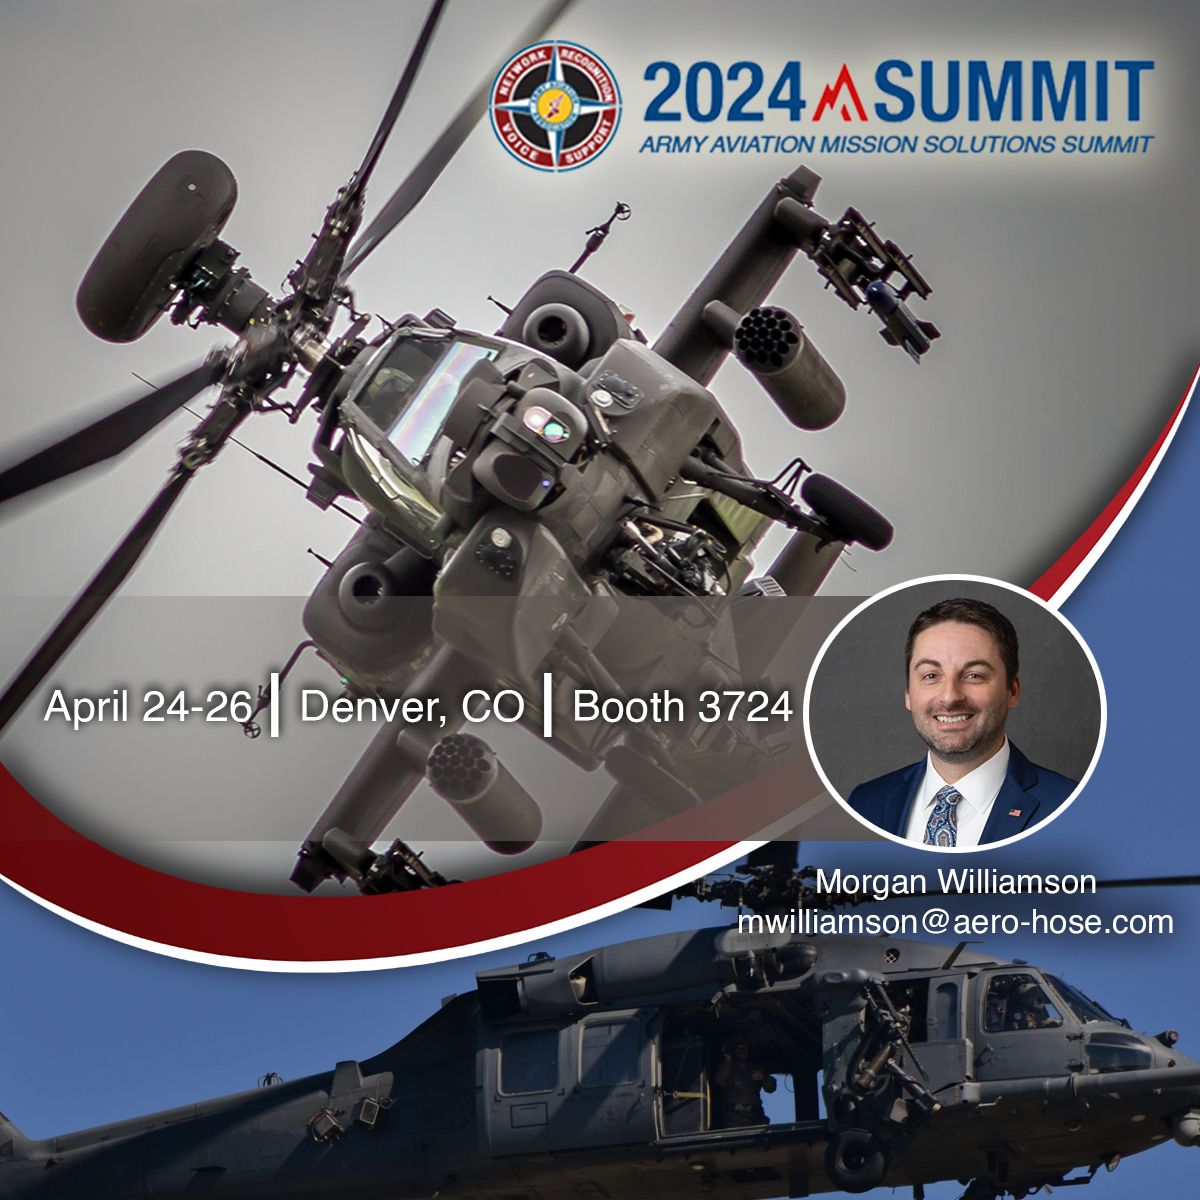 promotional auto draft for the 2024 army aviation mission solutions summit in denver featuring an apache helicopter, event details, and a photo of morgan williamson.